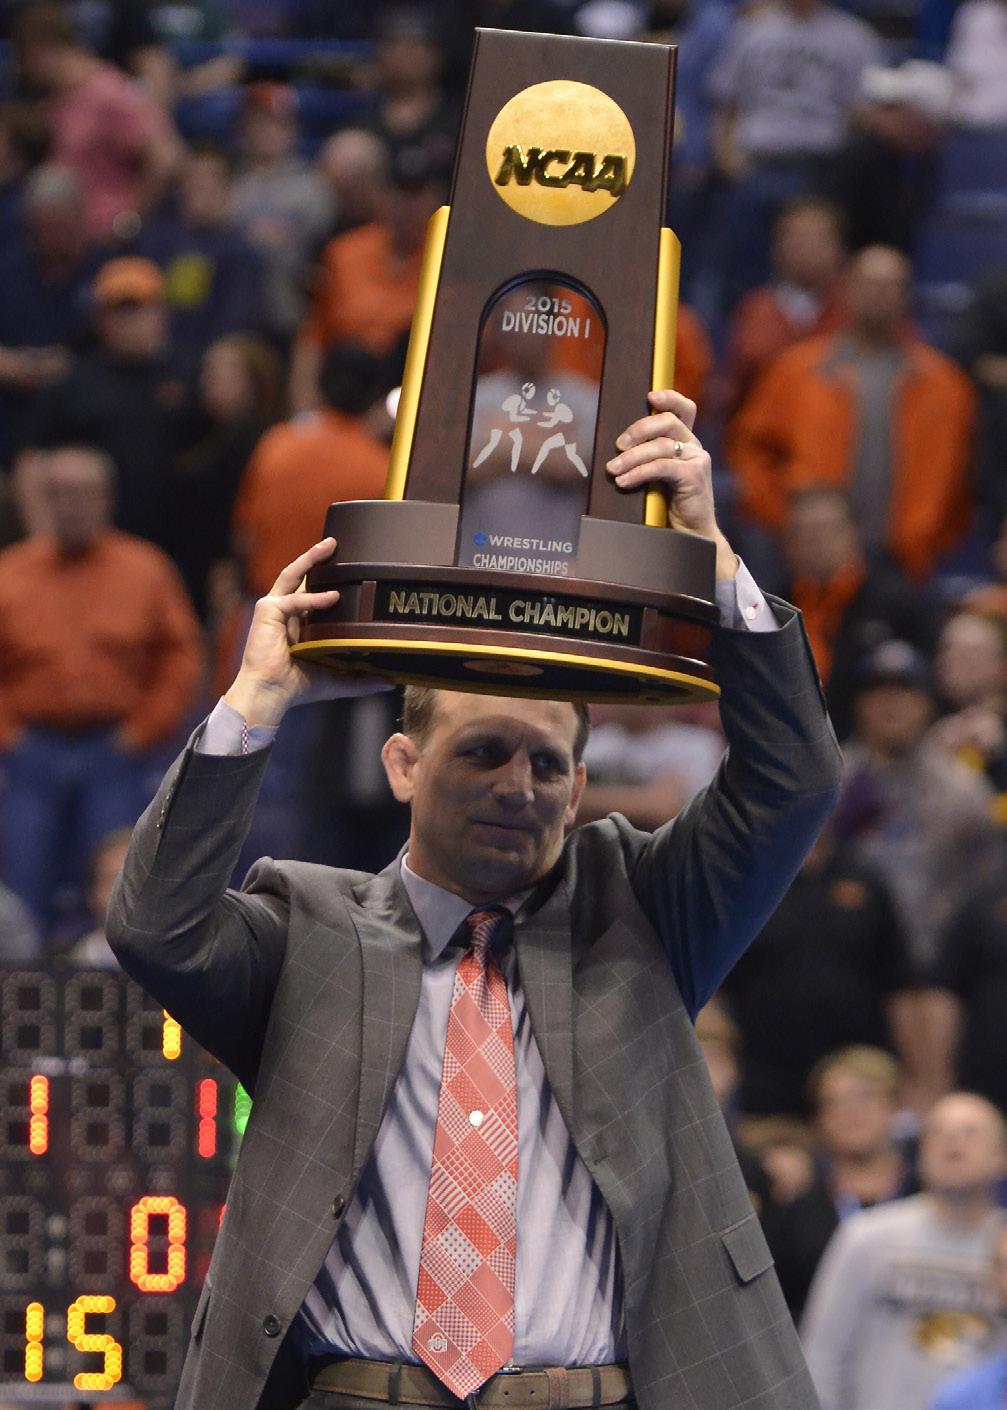 HEAD COACH TOM RYAN Led the Ohio State wrestling program to unprecedented heights, capturing the 2015 NCAA National Championship Three-time Intermat National Coach of the Year (2008, 2009, 2015)